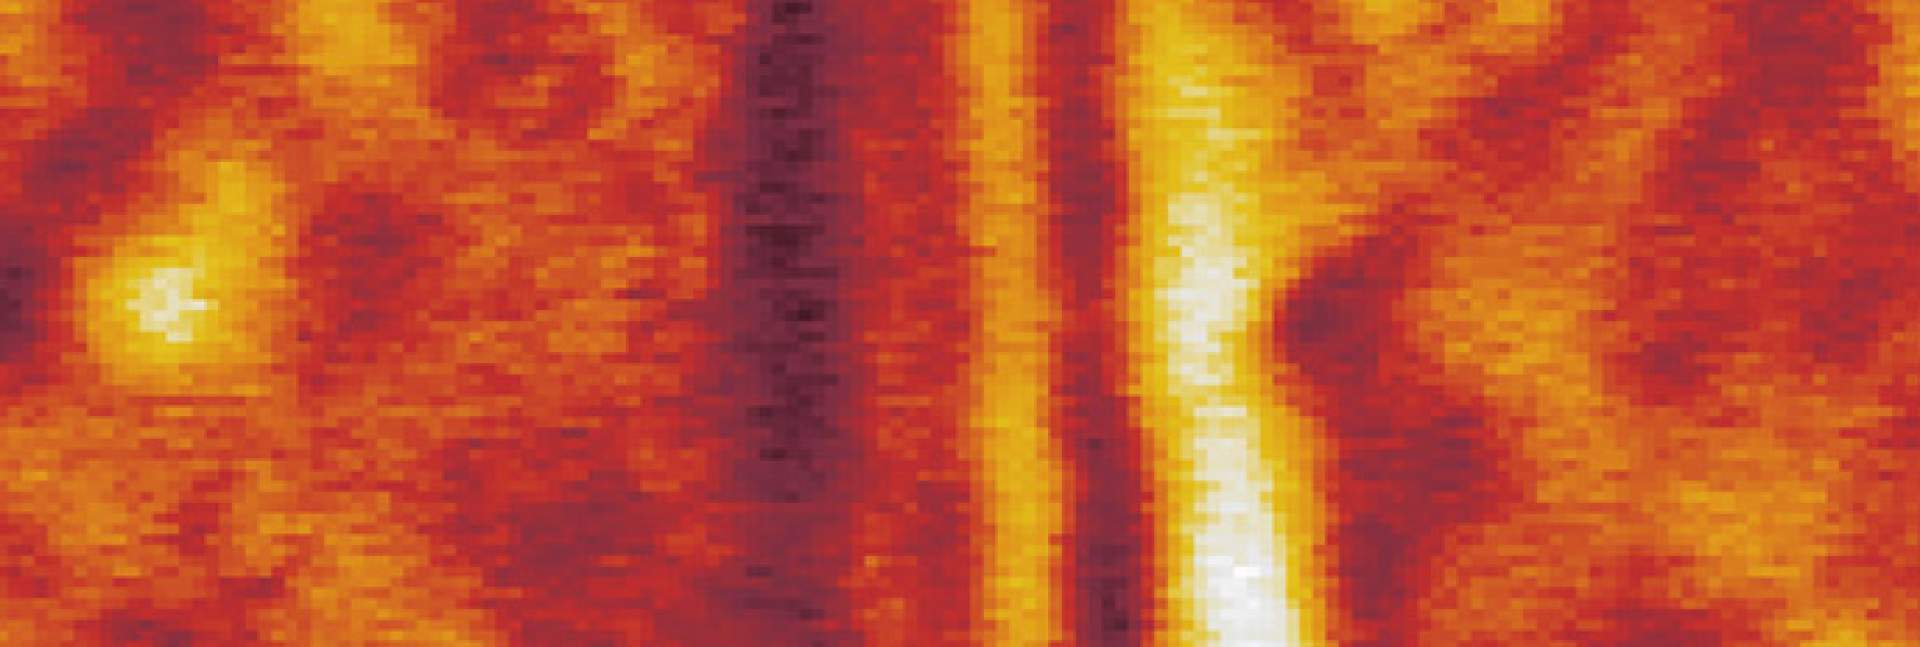 electron channels show opposite directions of flow